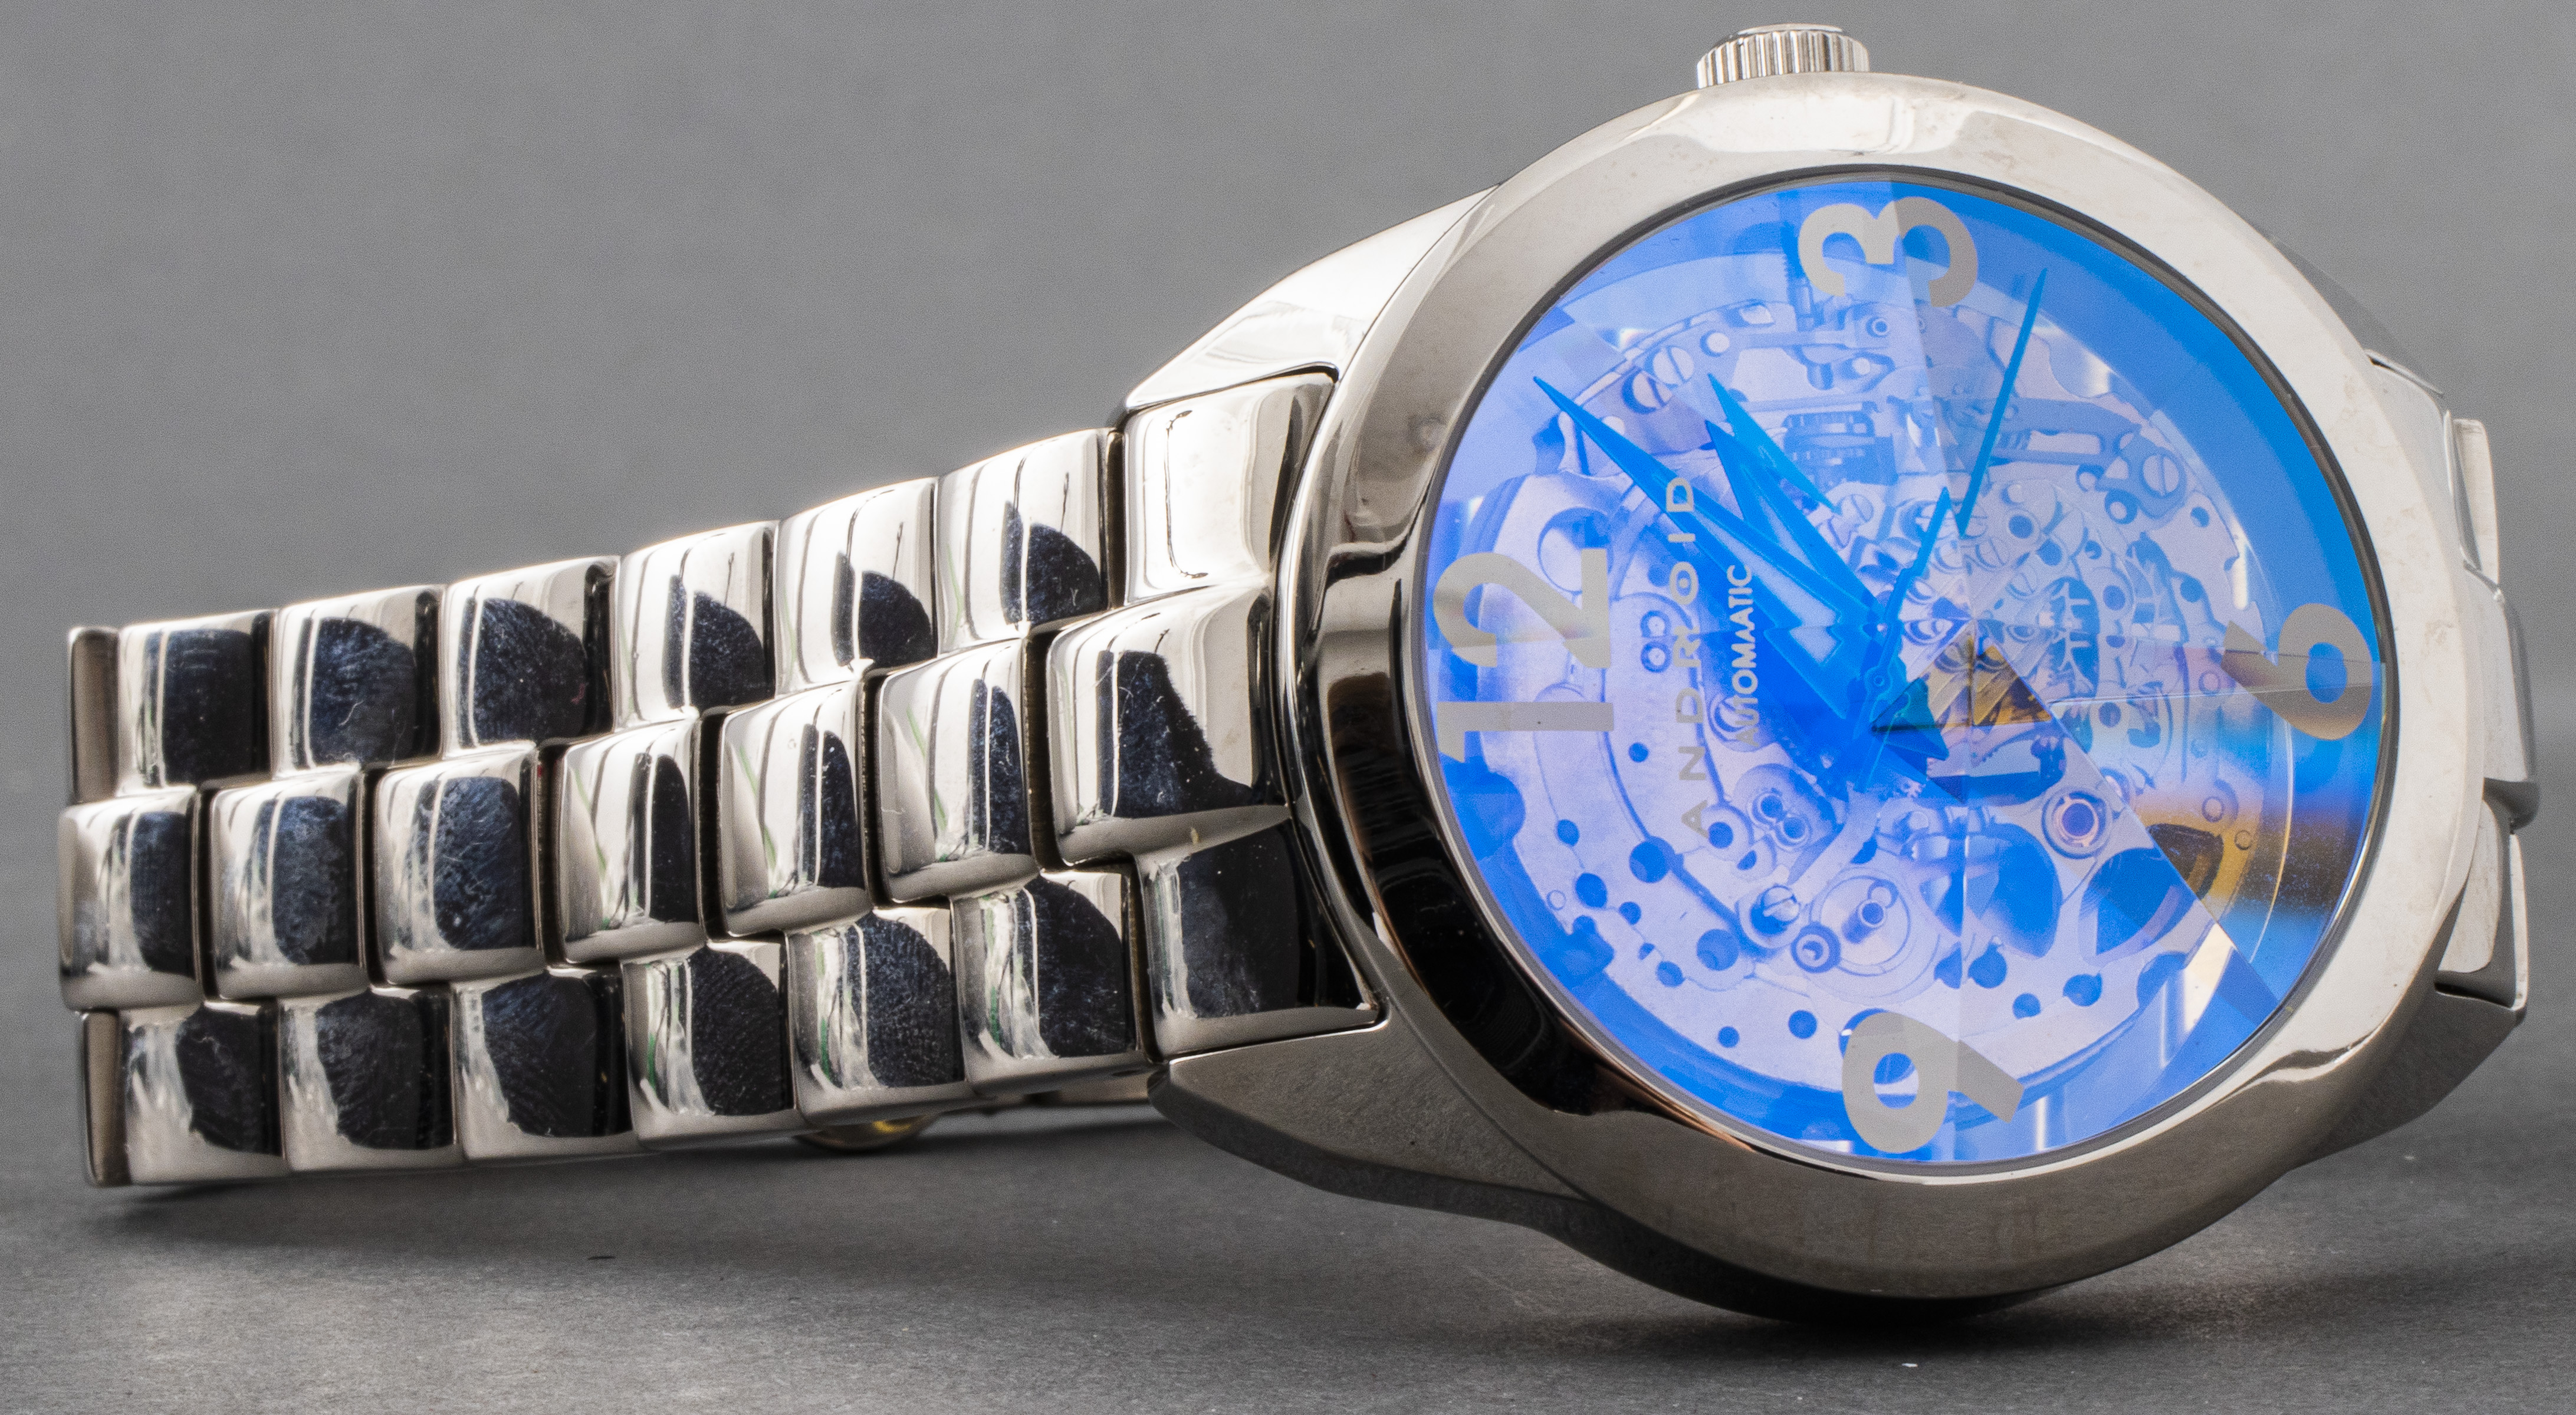 ANDROID "PRISM" AUTOMATIC WRISTWATCH